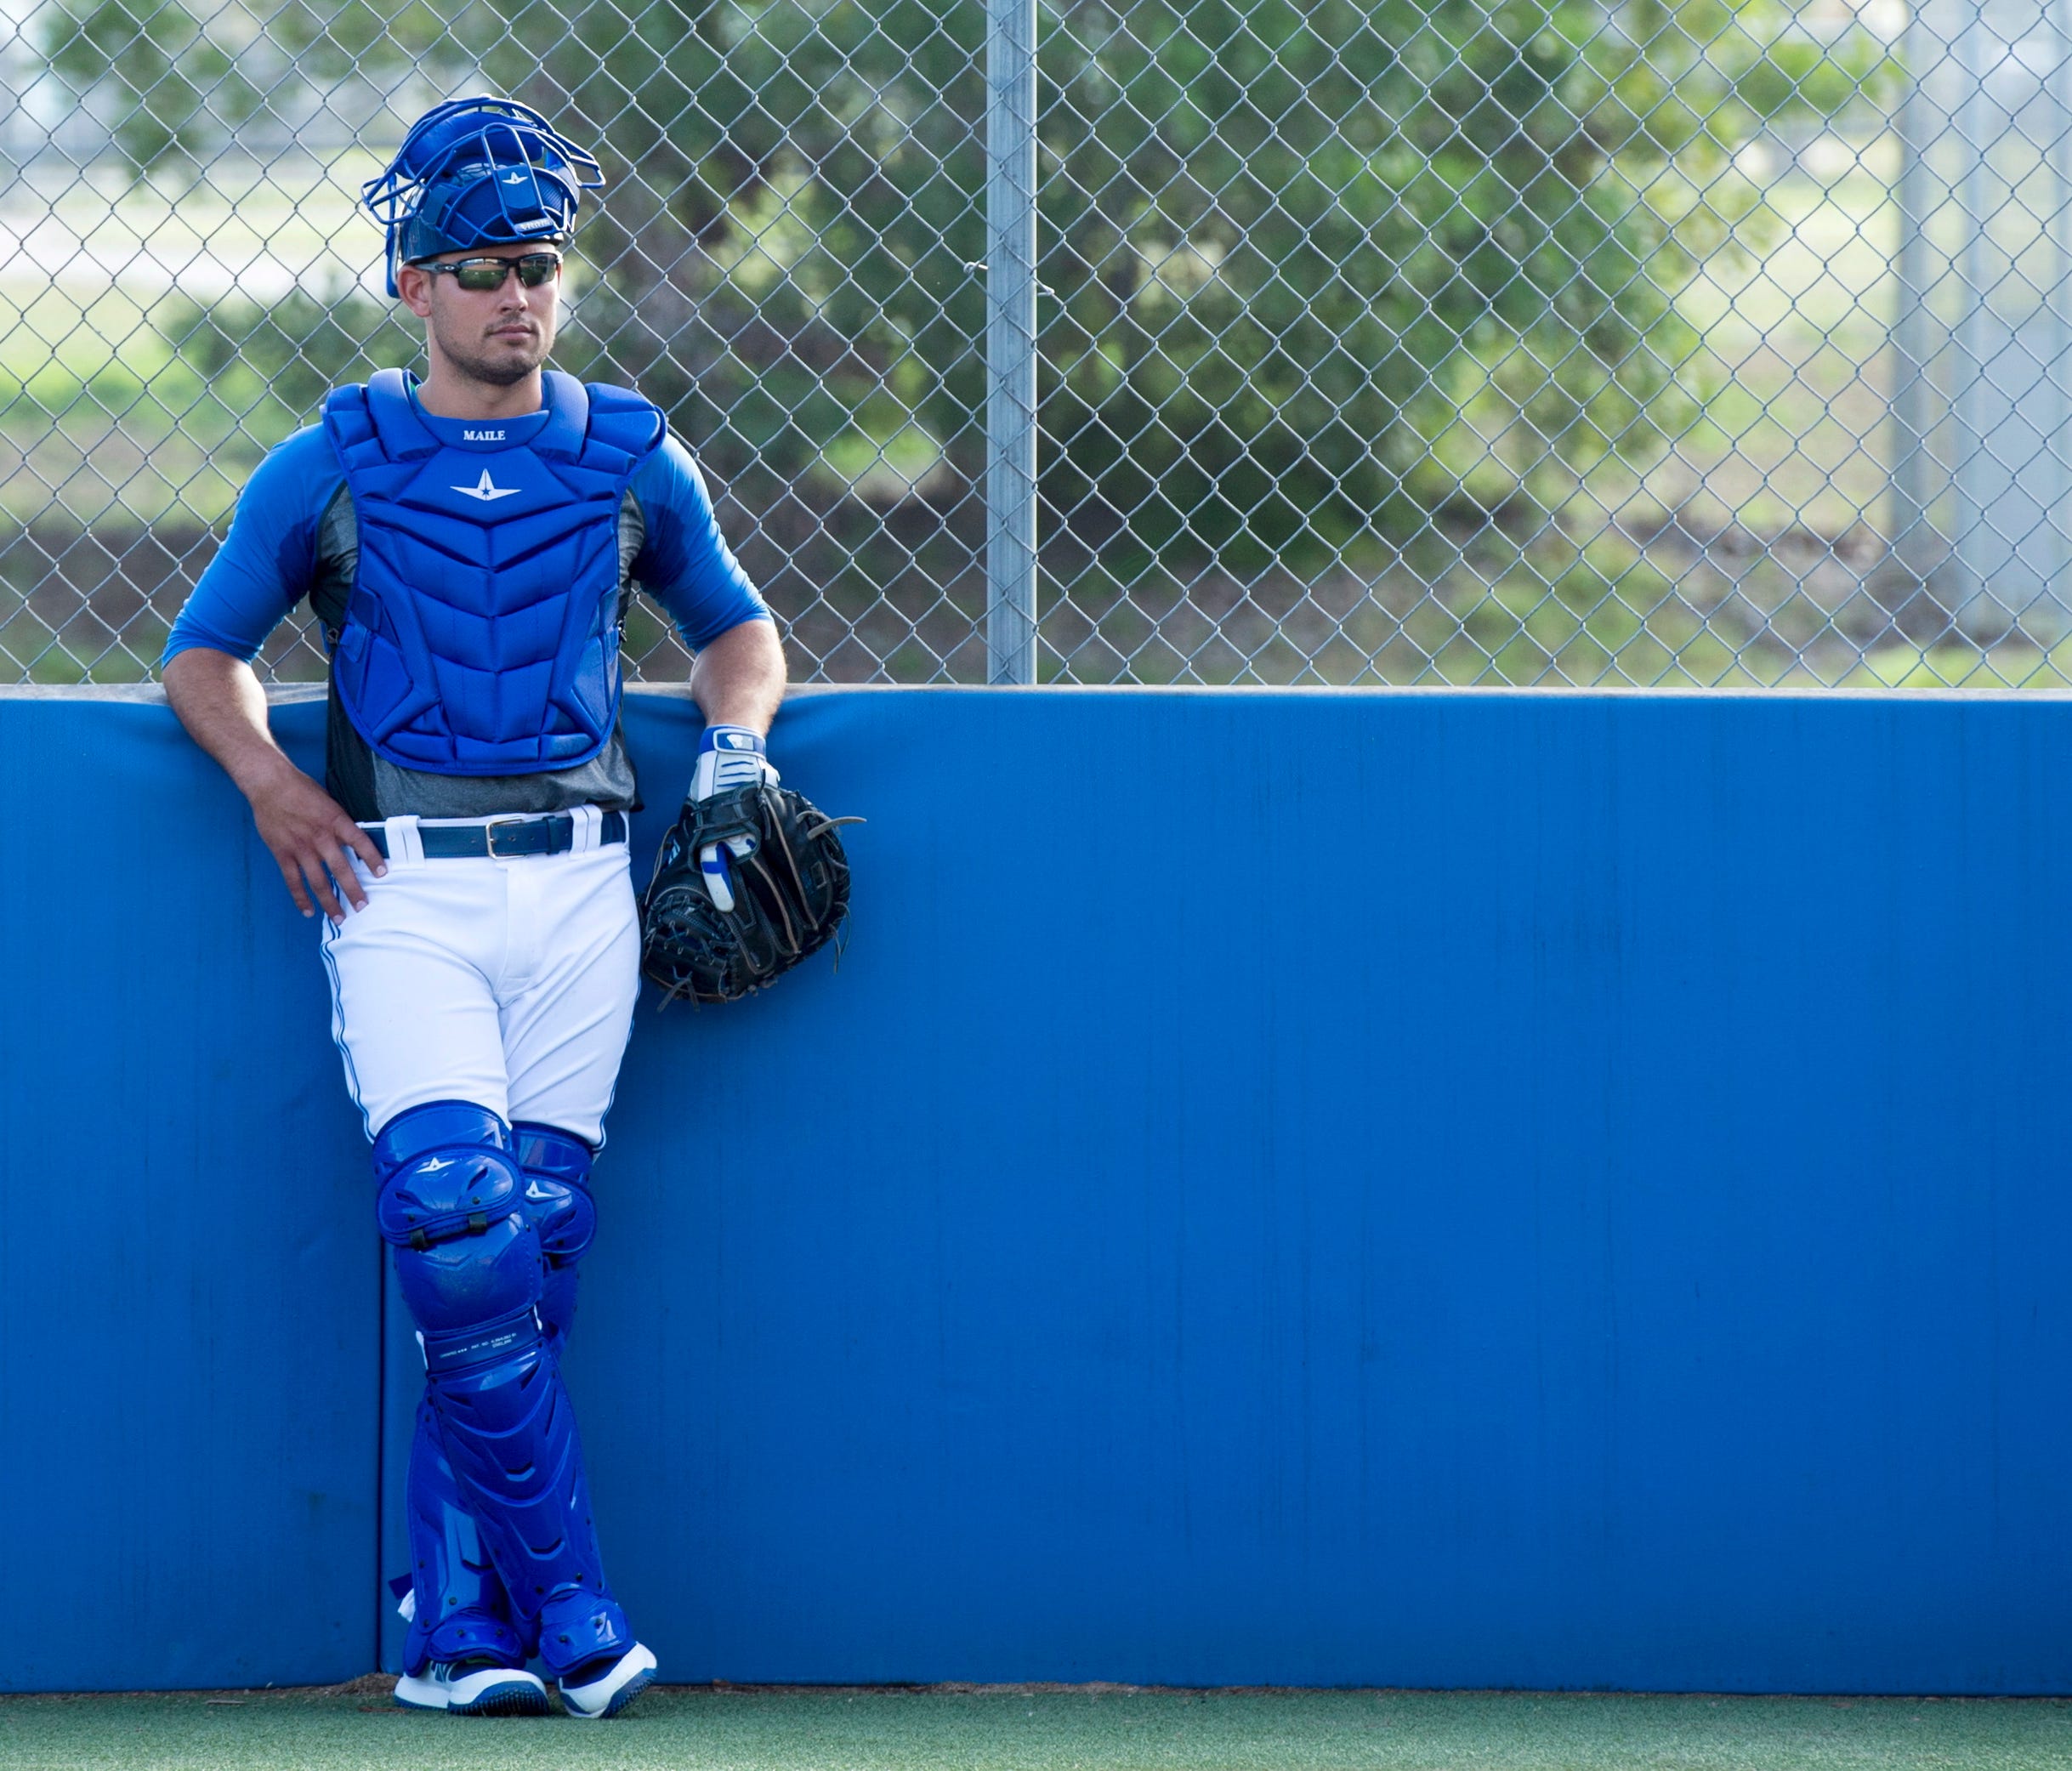 Pitchers and catchers began officially reporting on Tuesday while some, like the Blue Jays' Luke Maile, have already reported to Florida and Arizona camps.